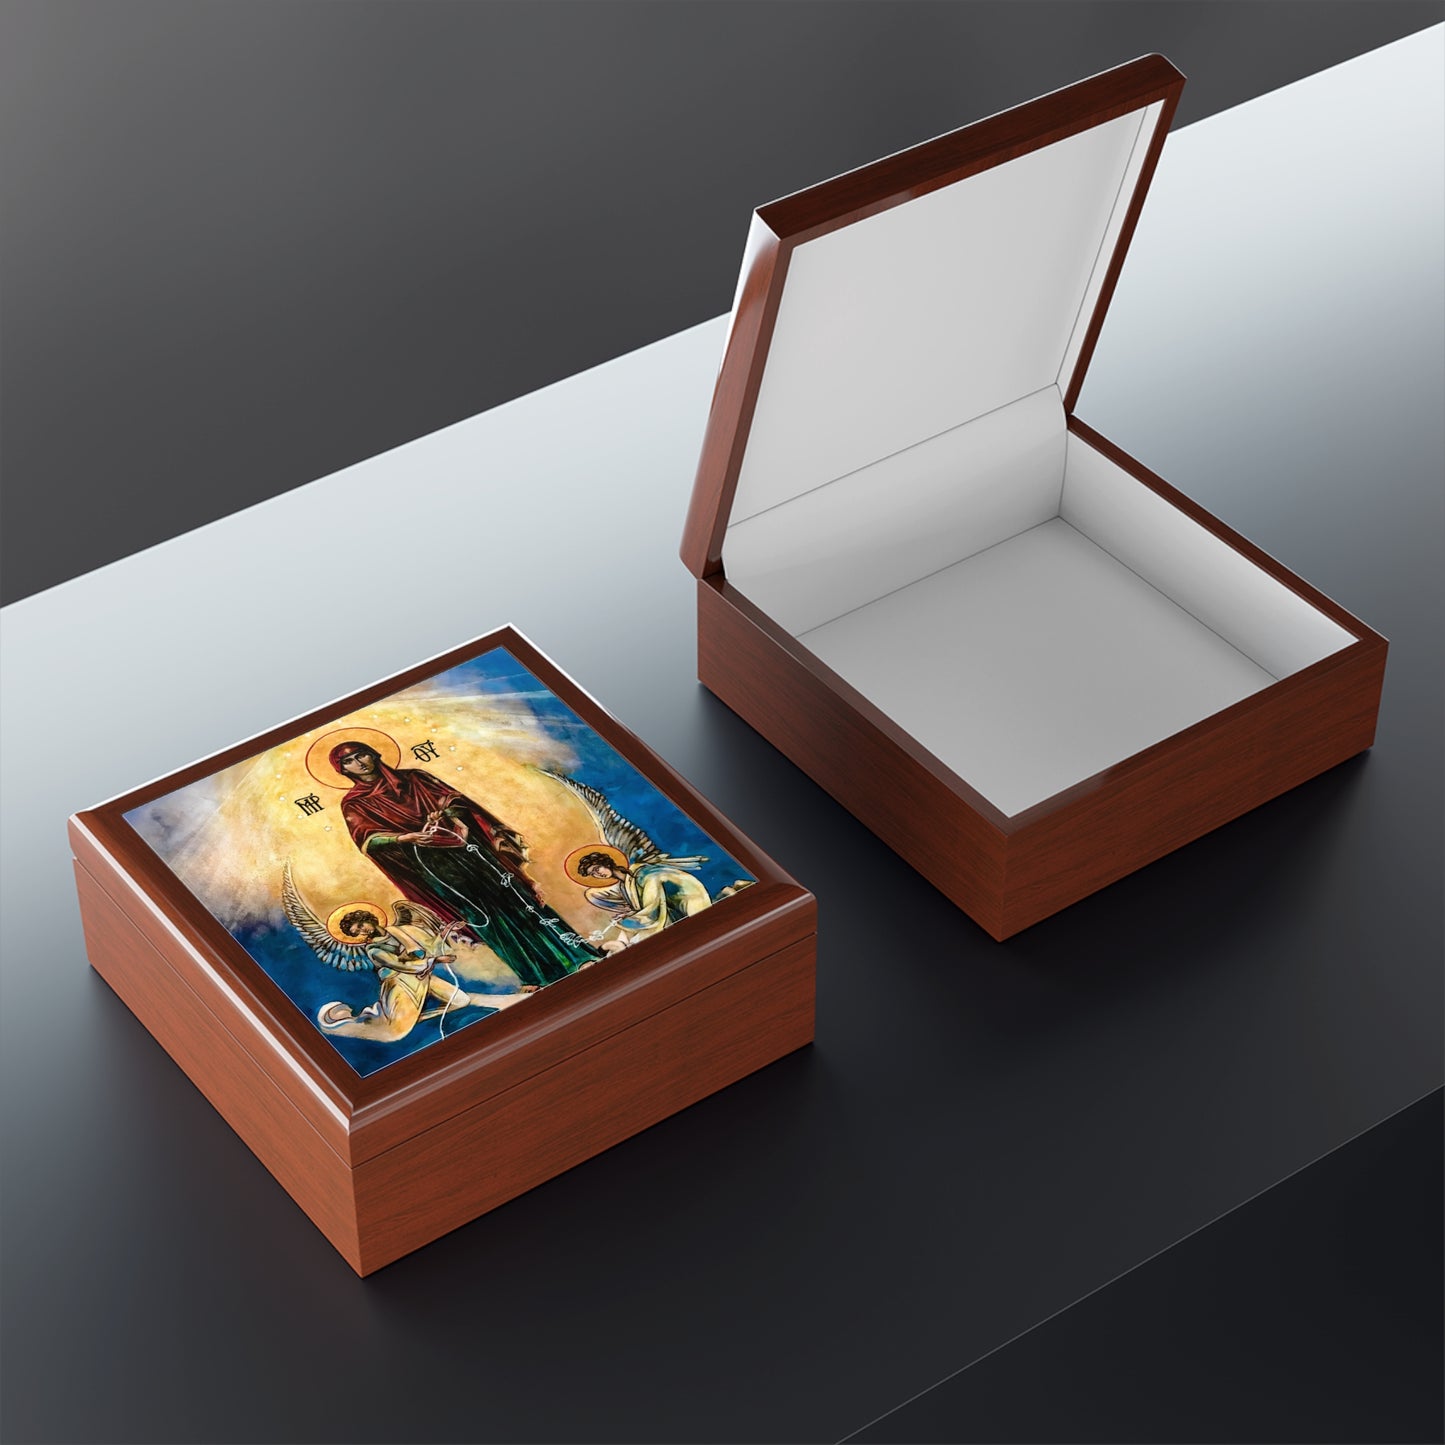 Theotokos - Our Lady Untier of Knots - #ReliquaryBox #JewelryBox